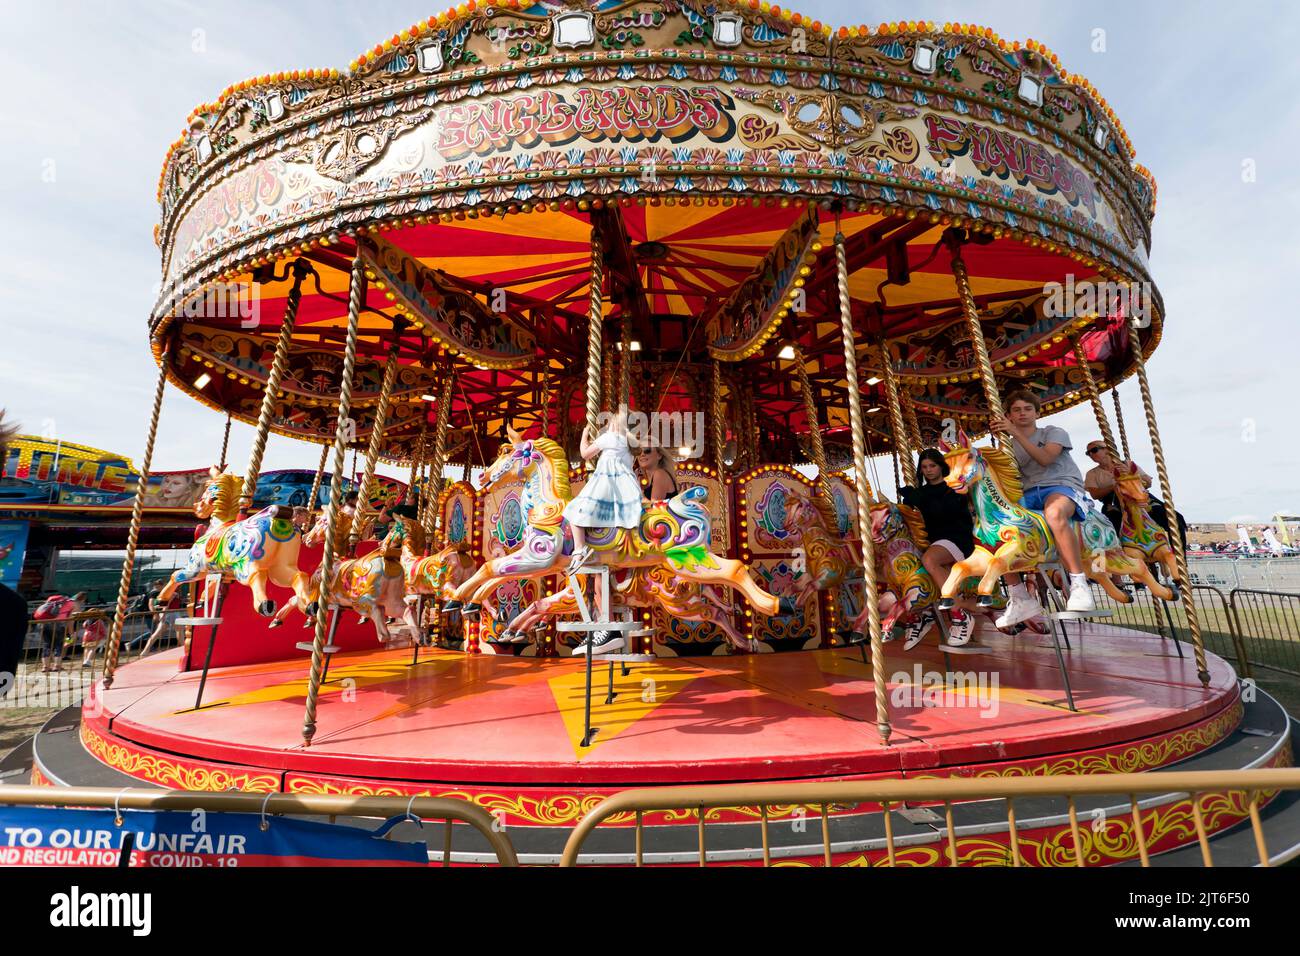 Silverstone Circuit, Silverstone, Nr, Towcester, 28th August,  2022. Carousel Funfair Ride on the Village Green at the 2022 Silverstone Classic.  Credit John Gaffen/Alamy Live News Stock Photo